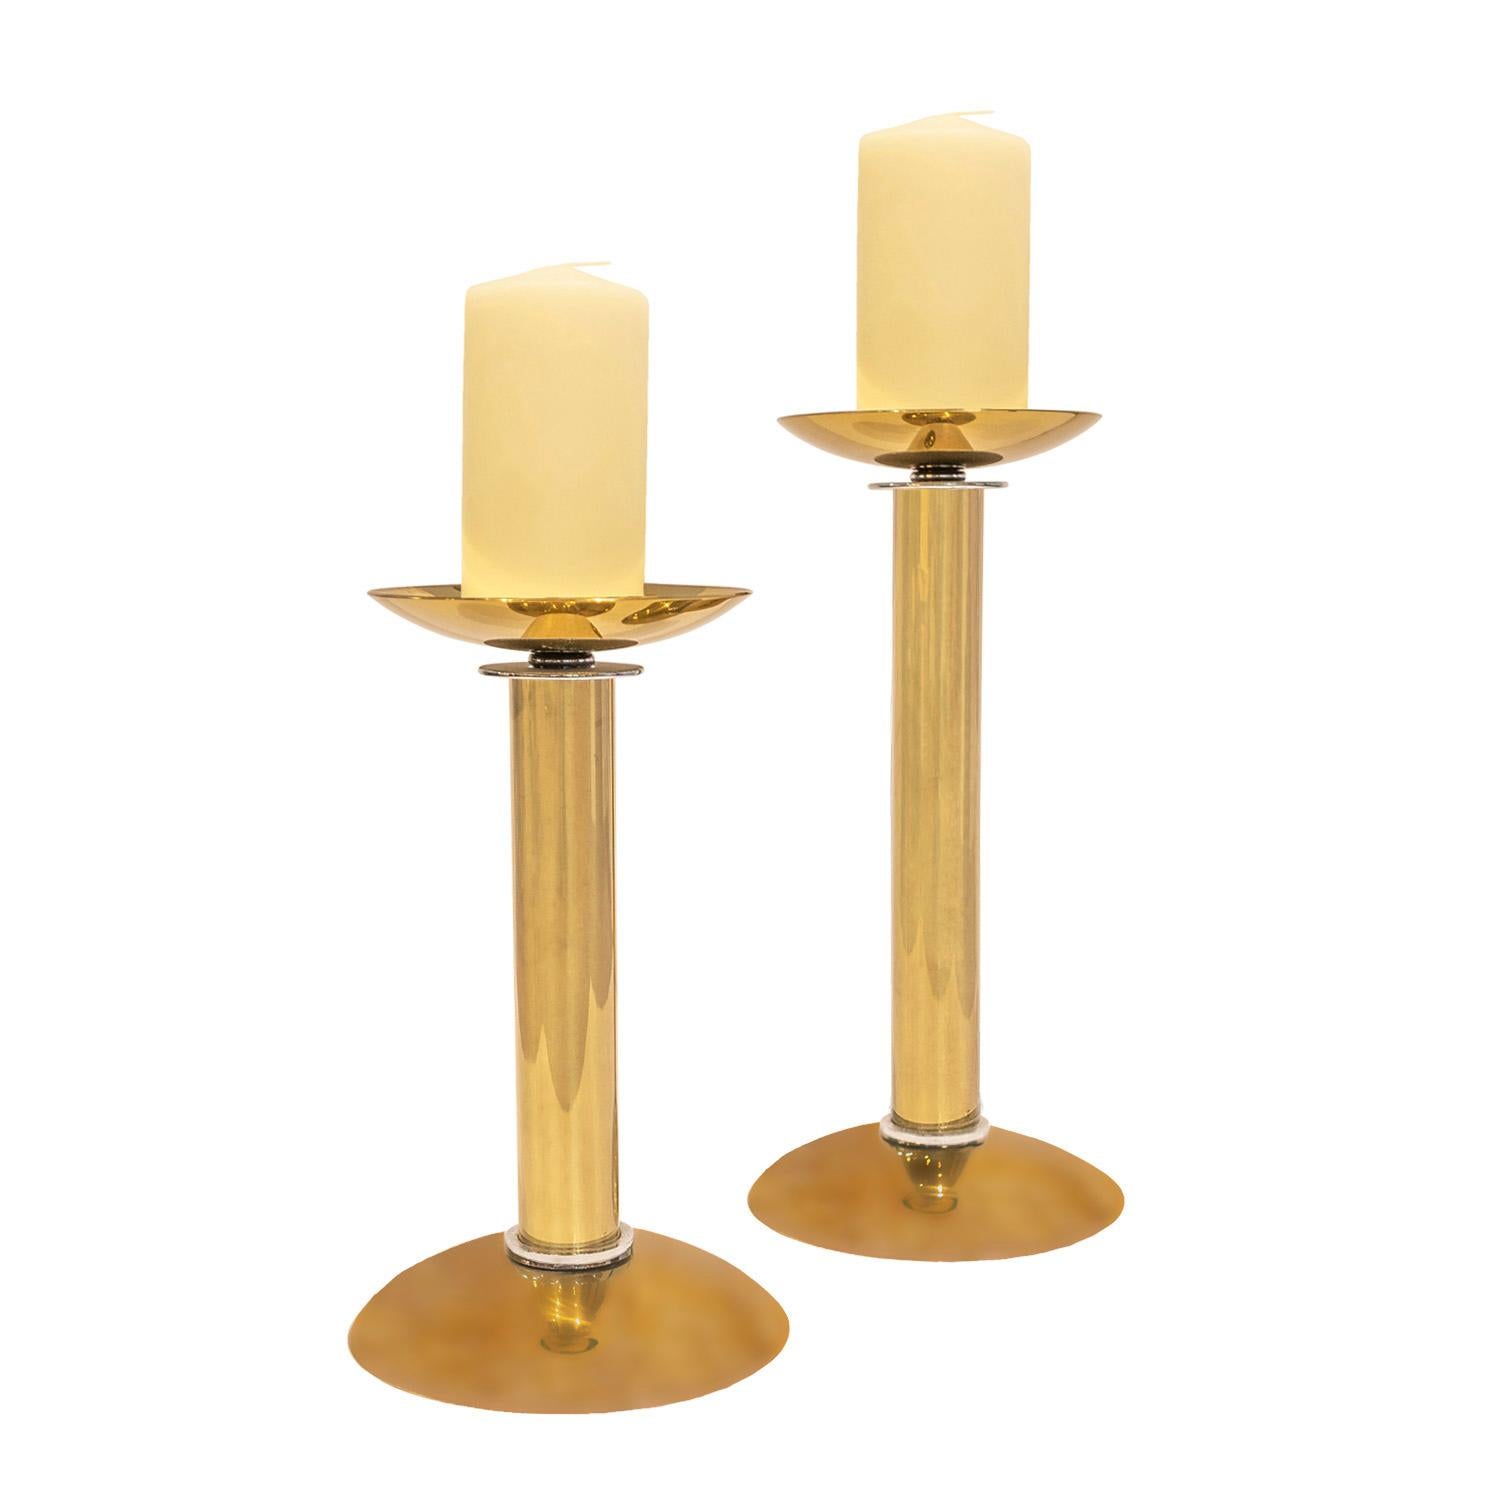 Modern Karl Springer Pair of Candle Holders in Brass with Chrome Accents, 1980s For Sale